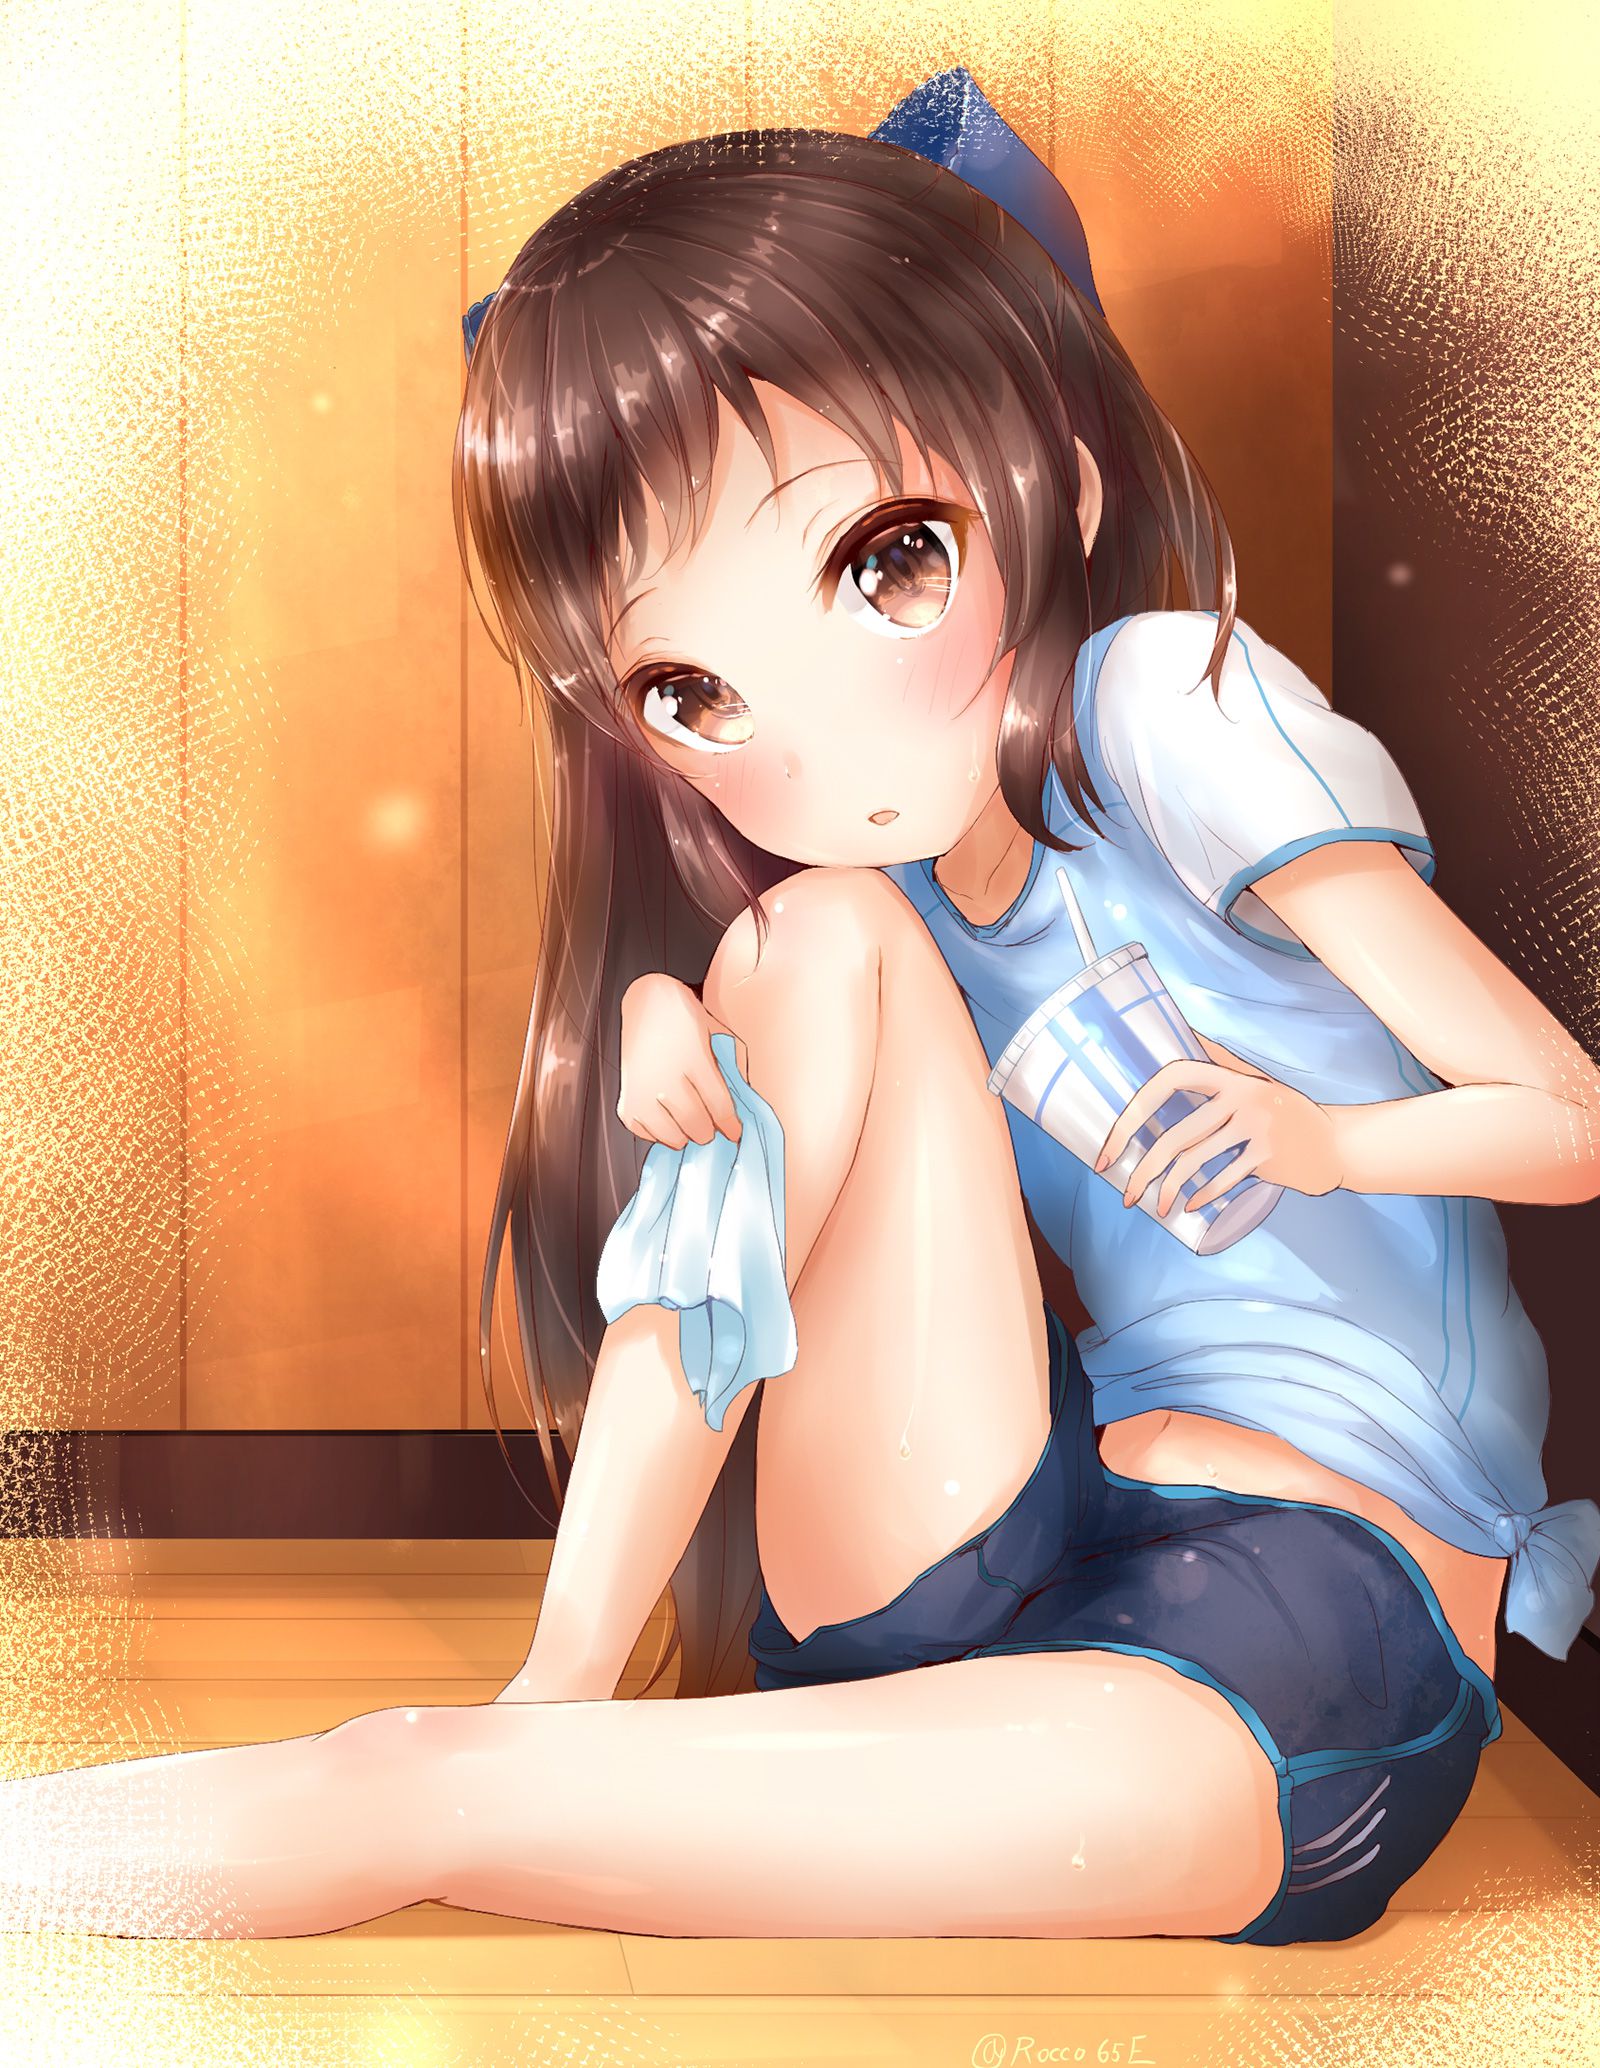 [39 pieces] I take an eroticism image having a cute the youth shorts & youth bra which is suitable for age of ガチ primary schoolchild Lolly Arisu Tachibana of デレマス! 38